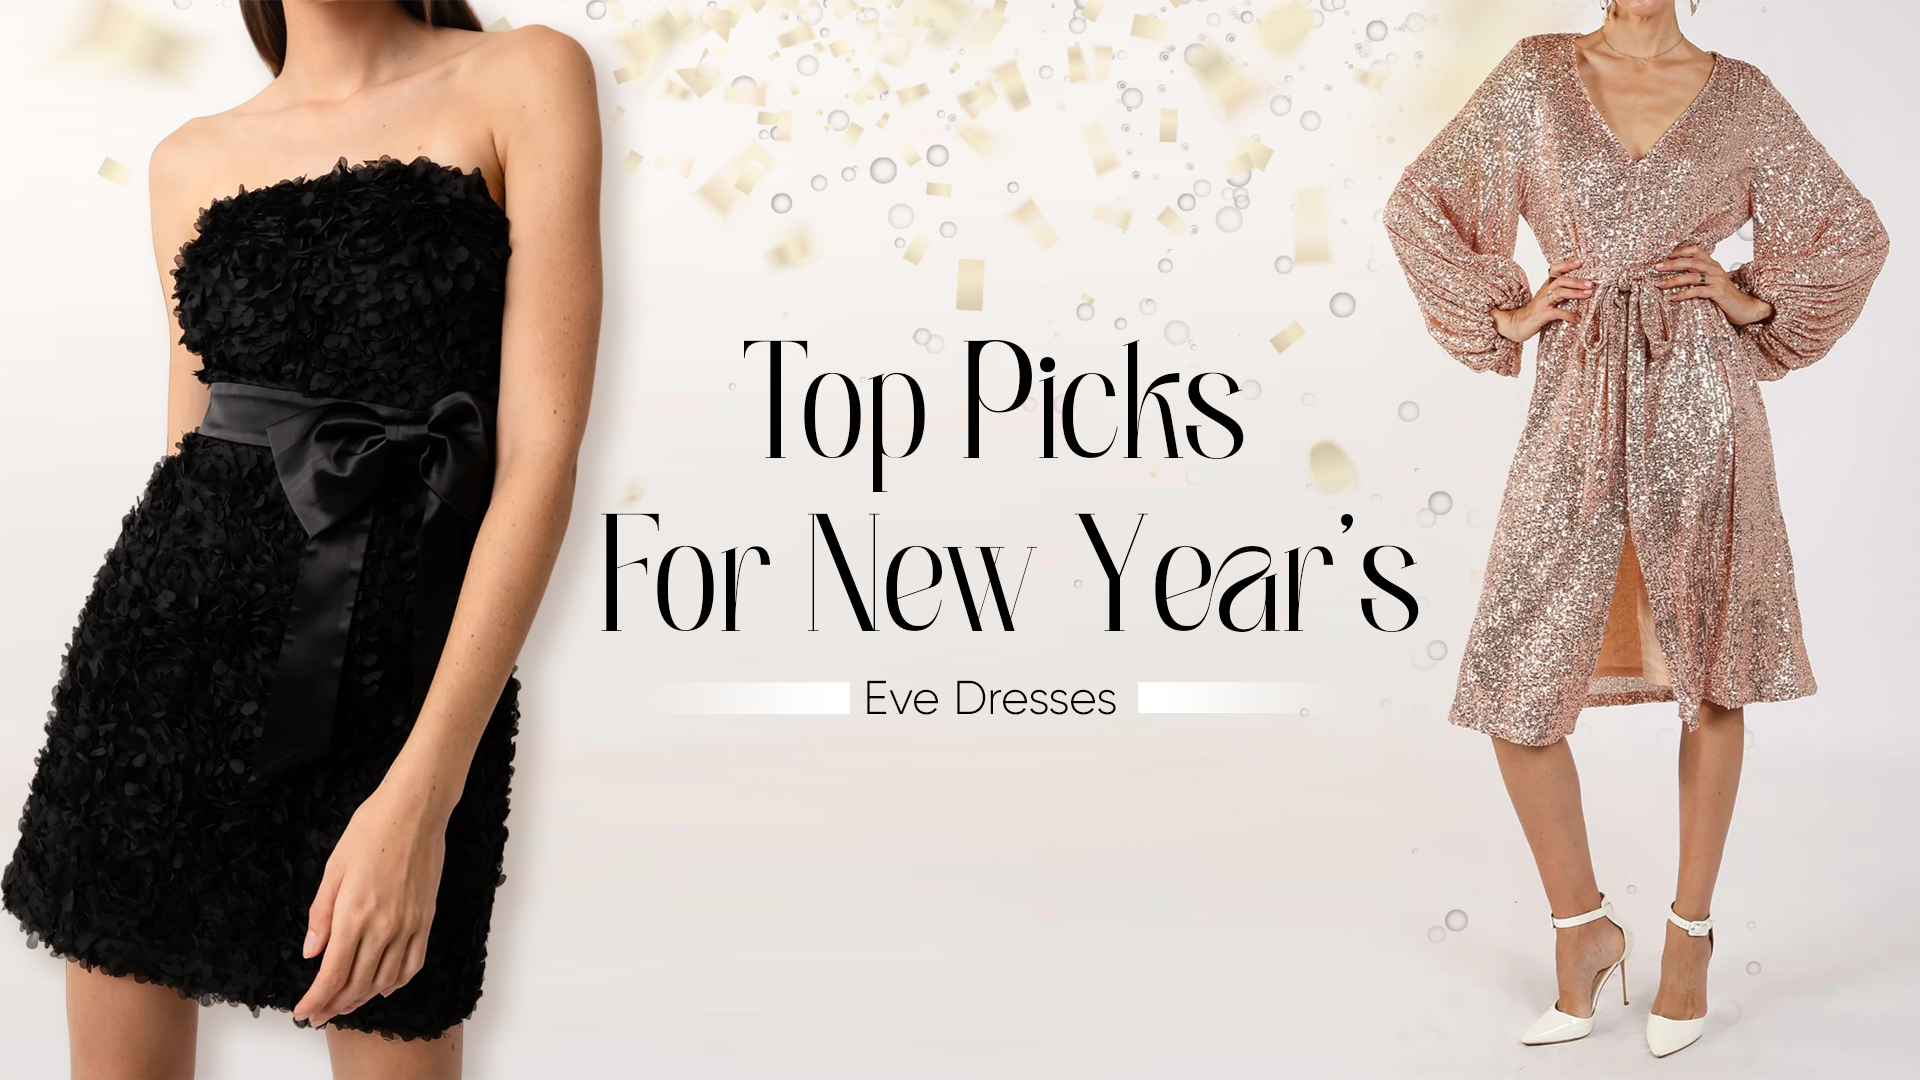 Ring in the New Year with Style | Top Picks for New Year's Eve Dresses